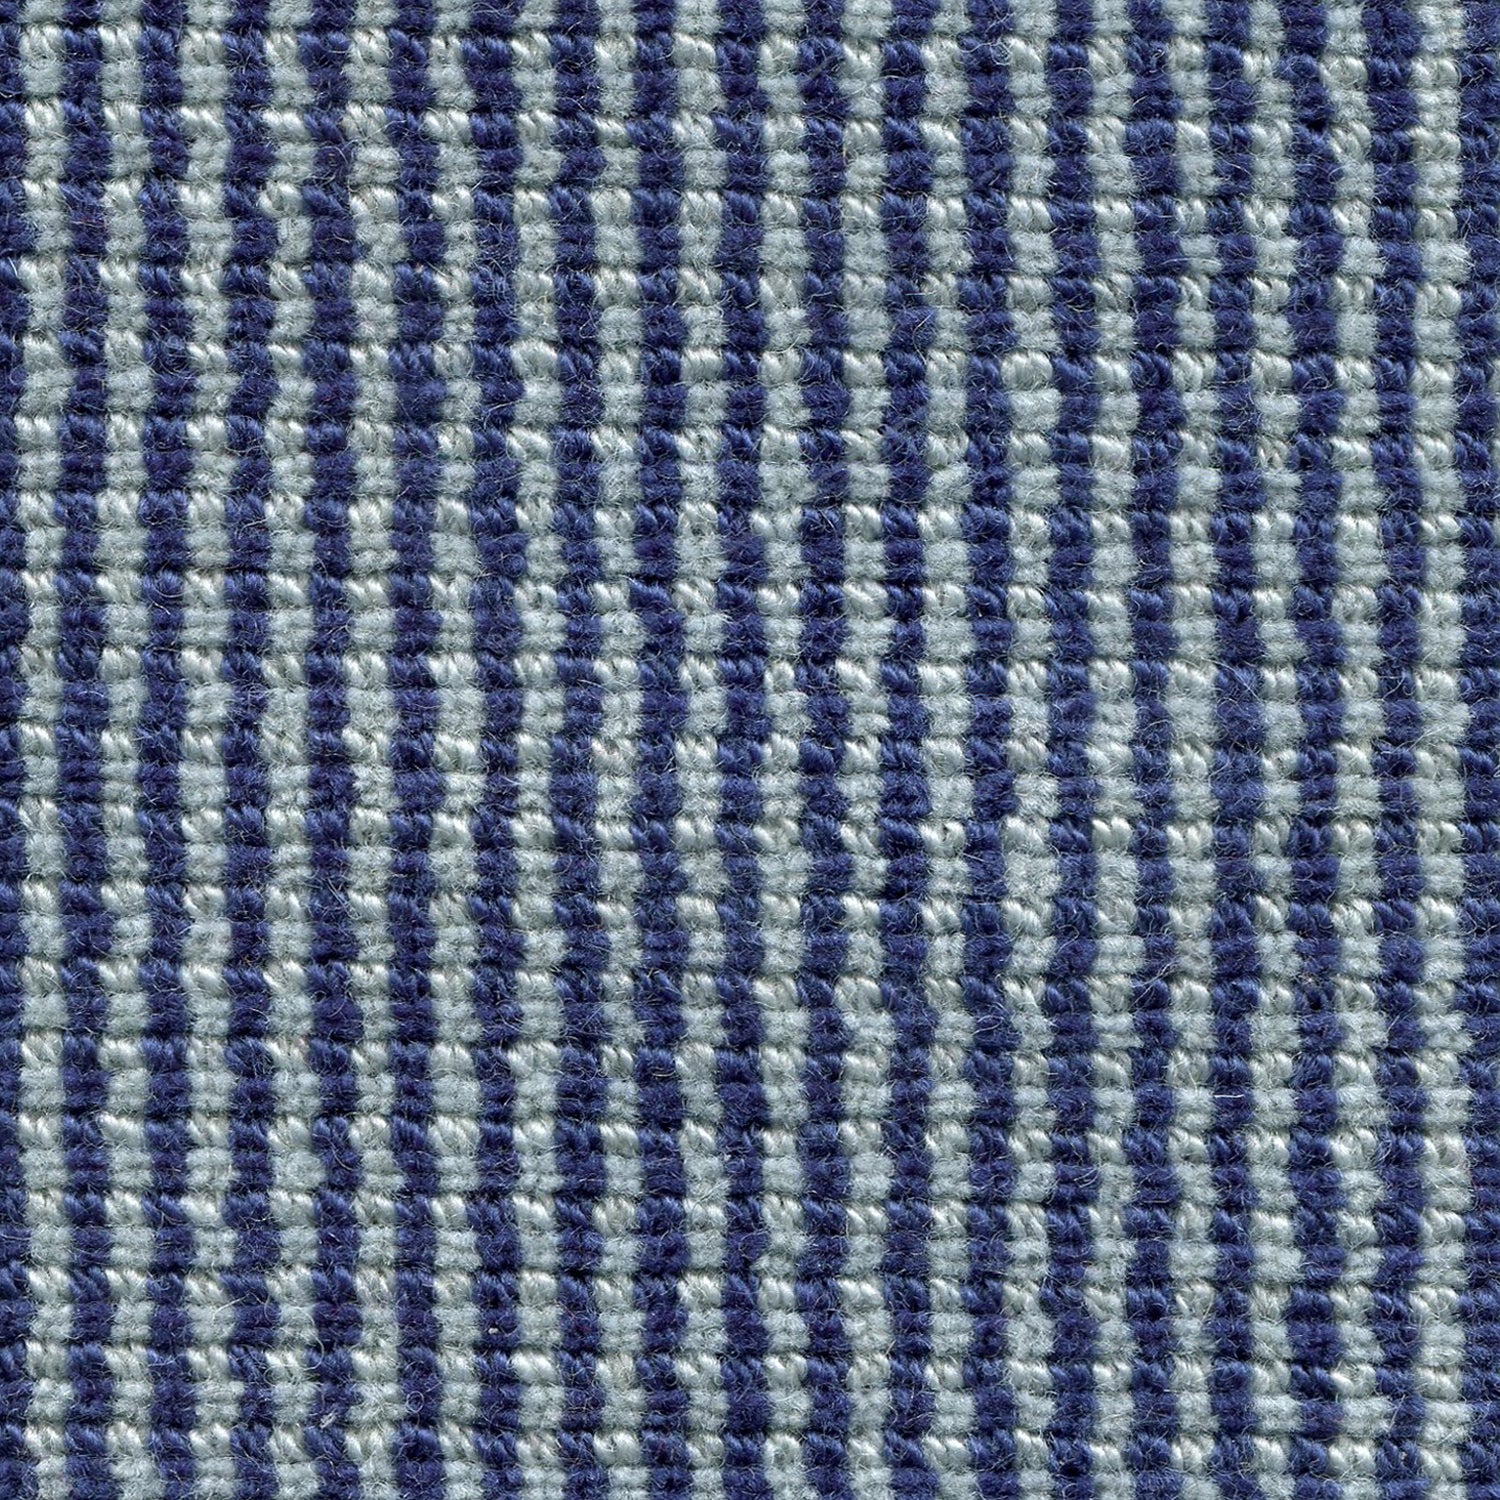 Wool broadloom carpet swatch in a high-pile striped weave in blue and sage.